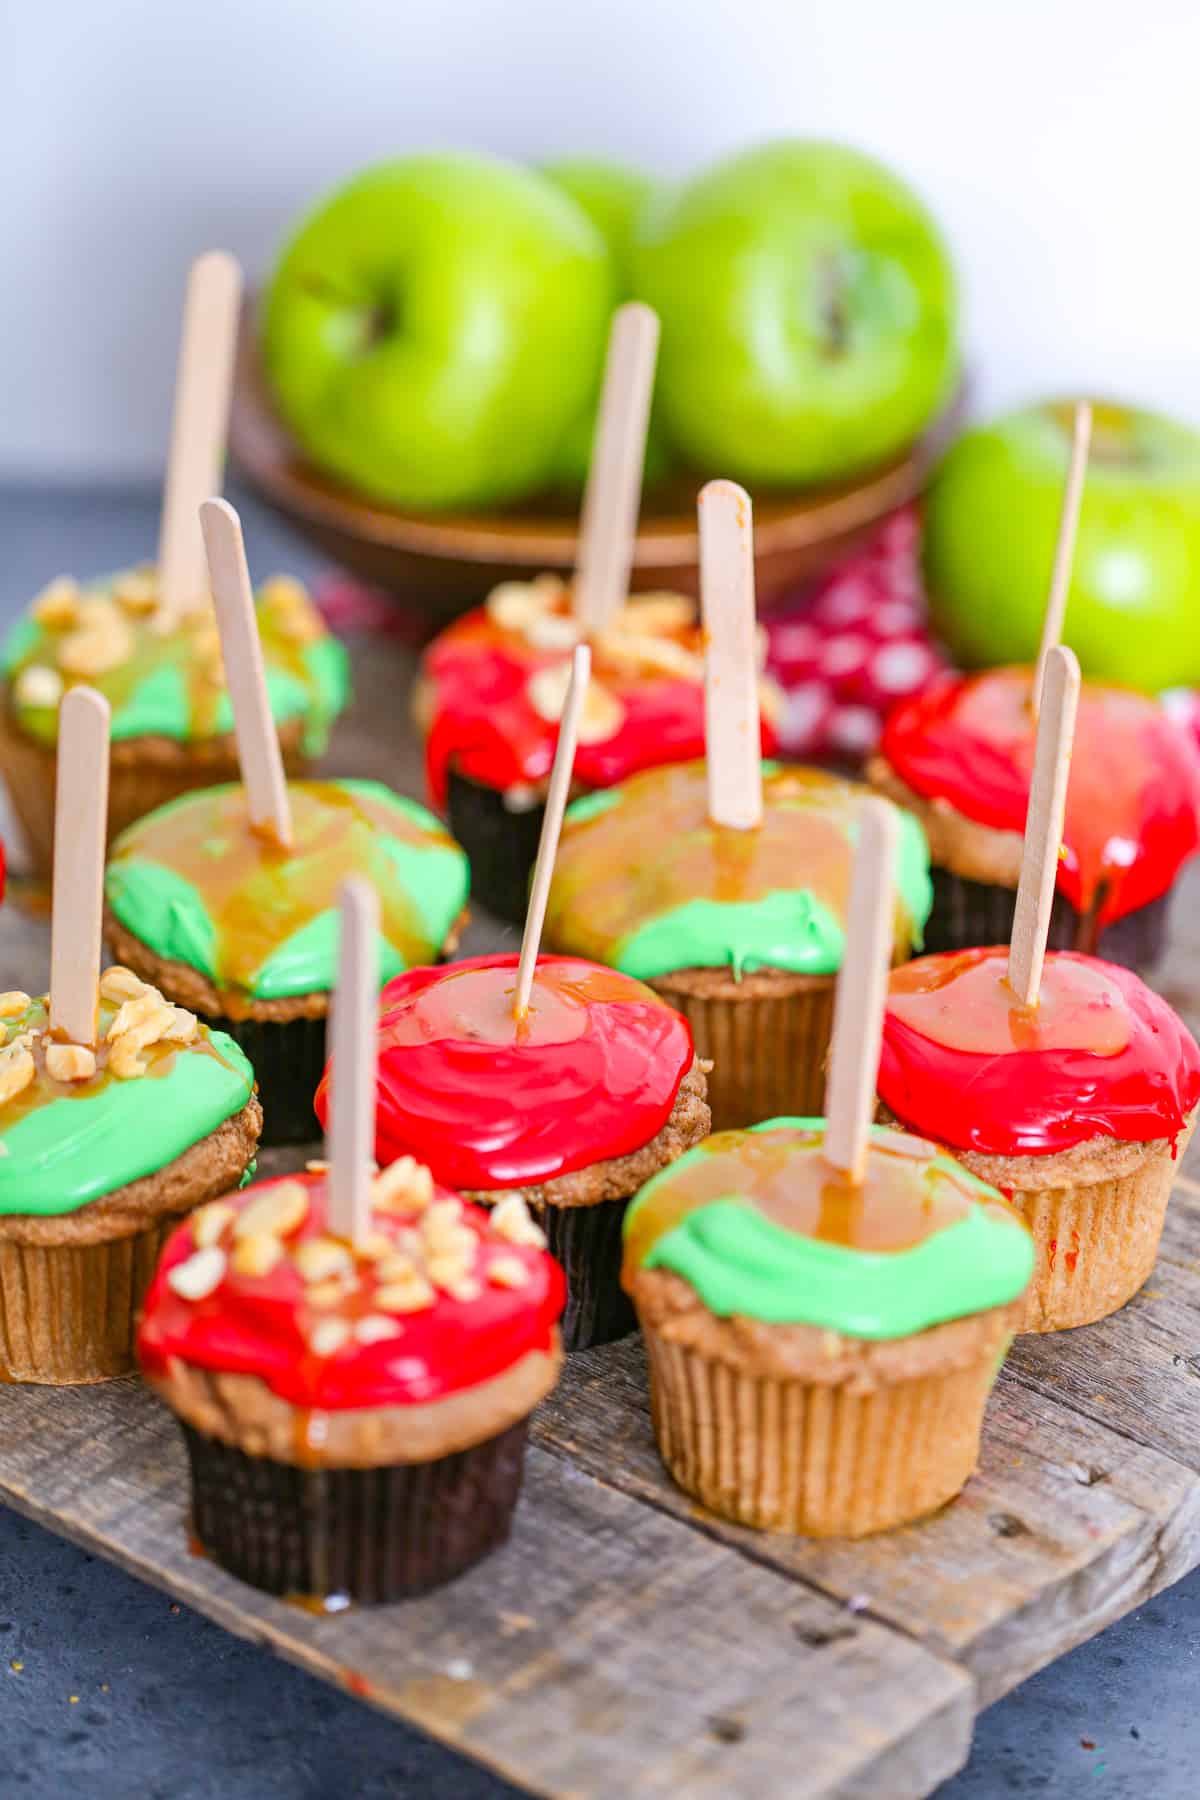 Caramel Apple Cupcakes recipe salted buttercream frosting